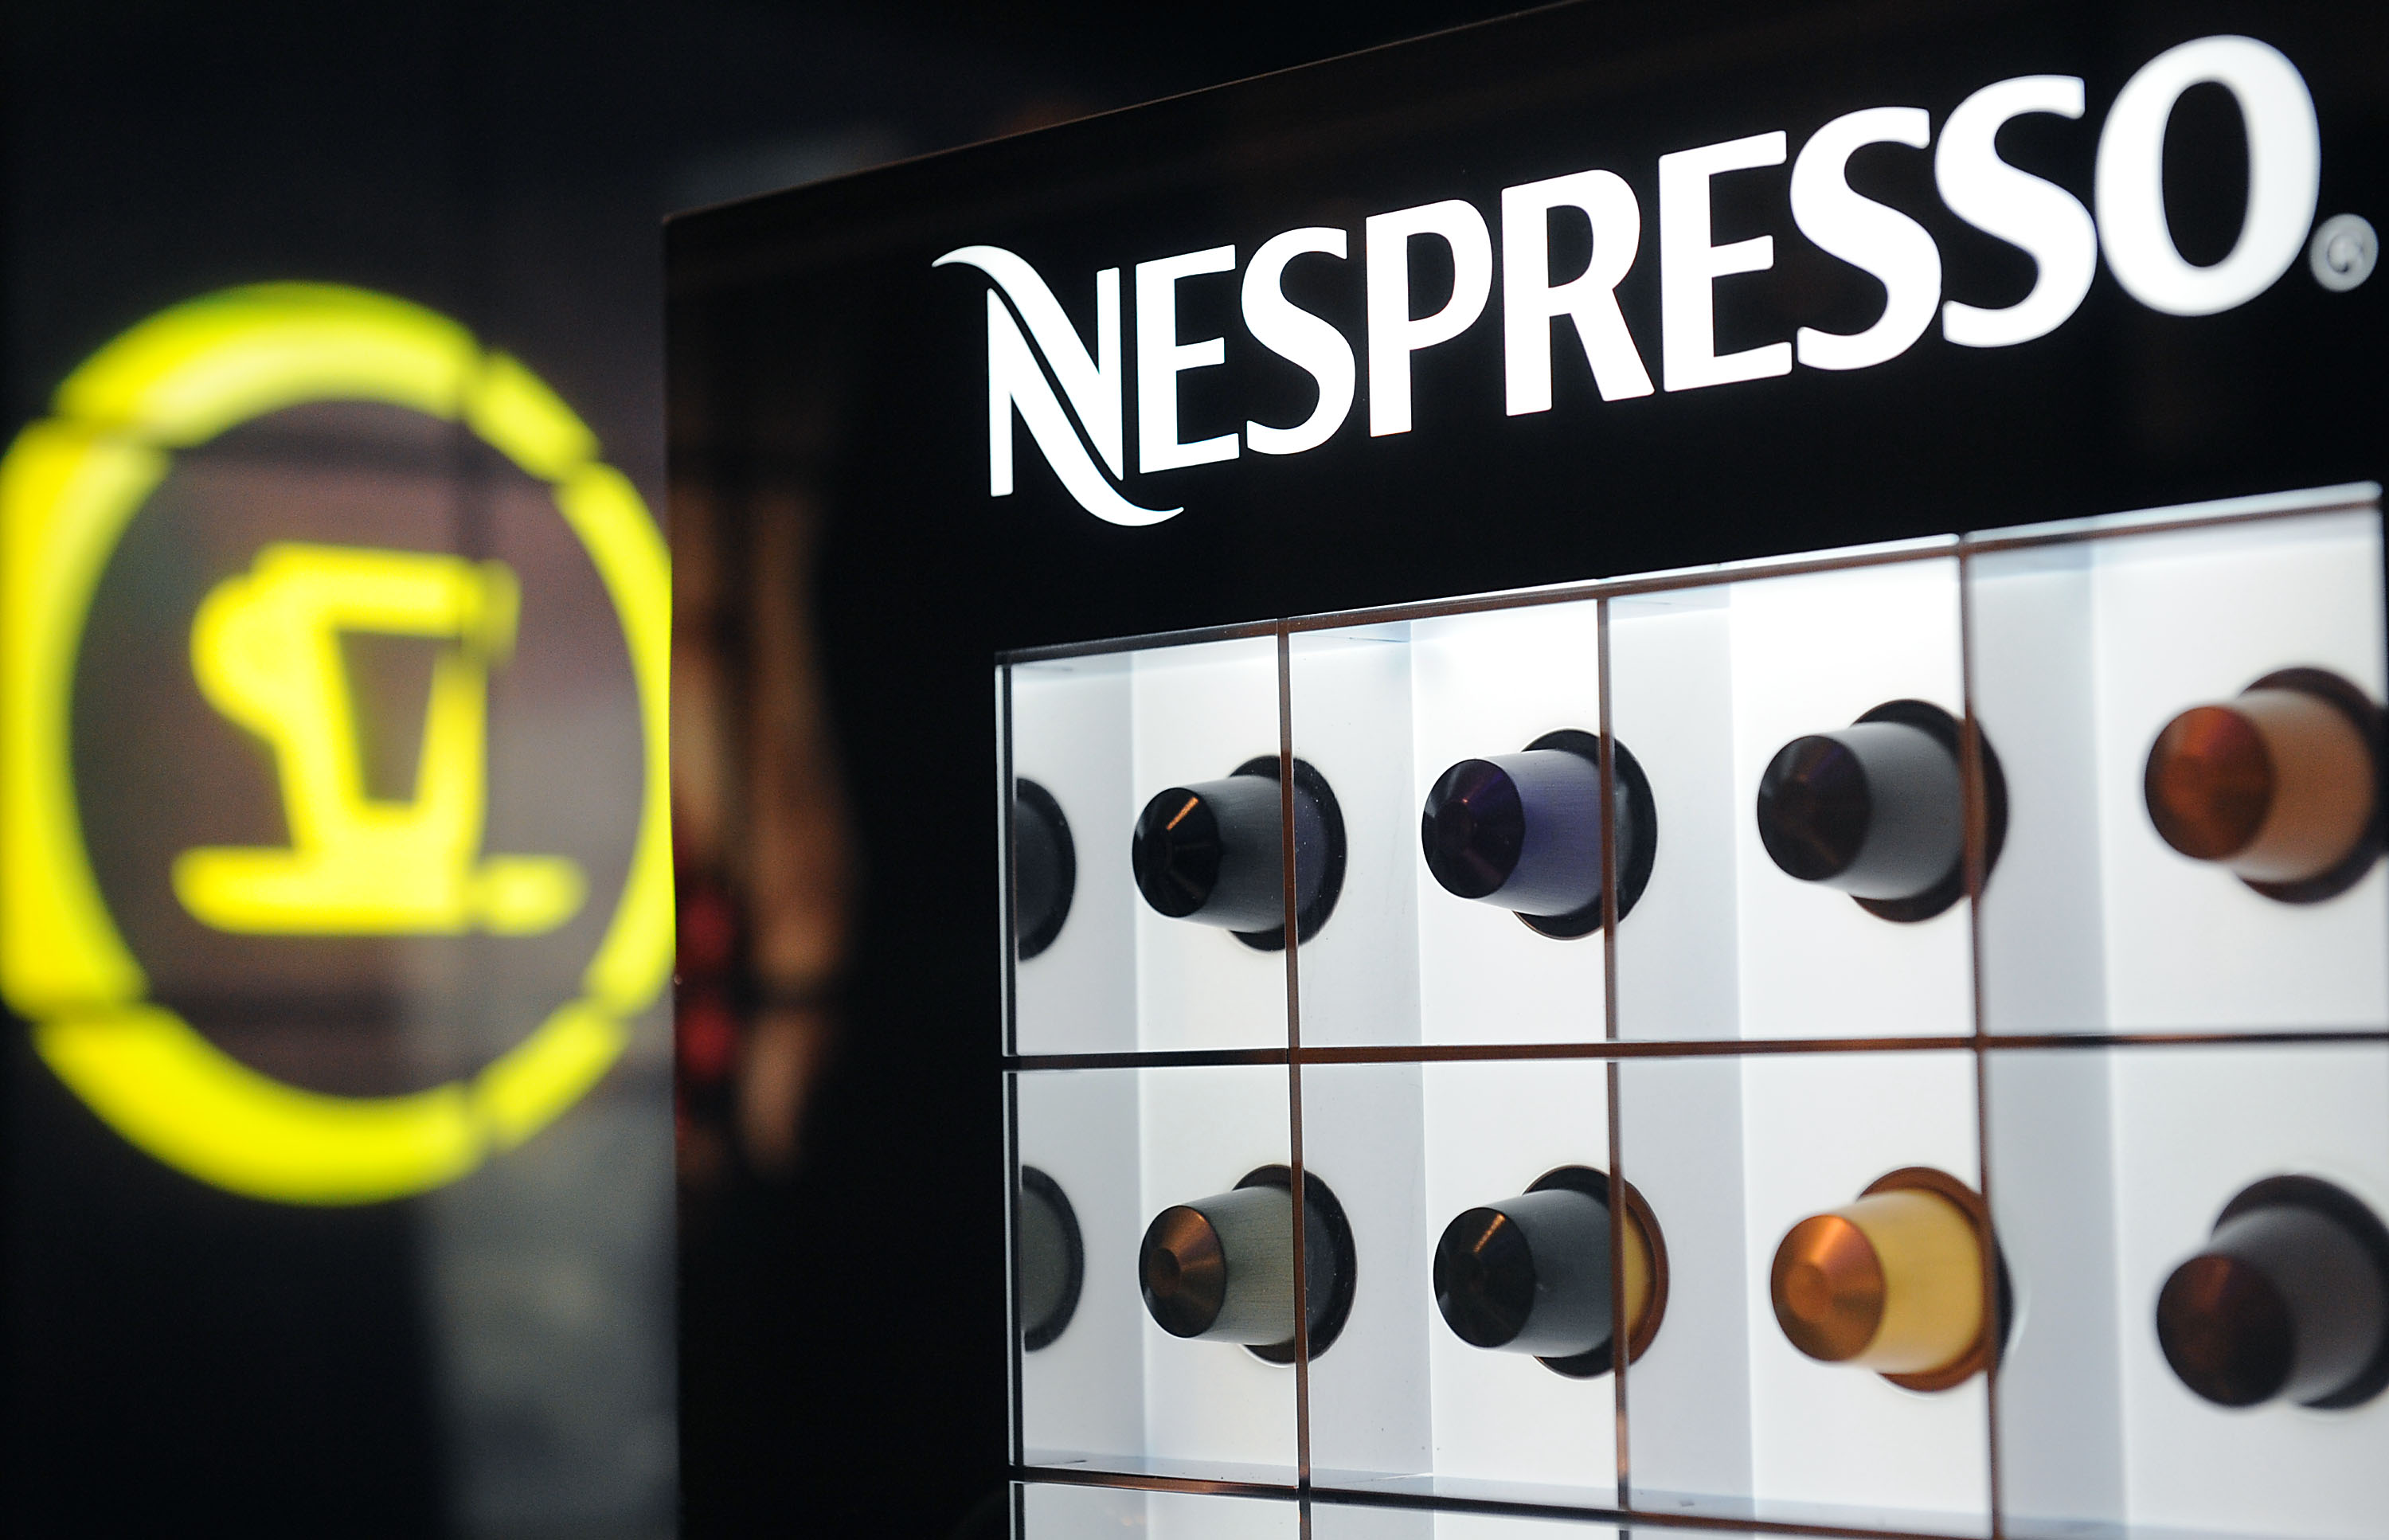 Nespresso's Larger Coffee Pods Won't Work With Your Machine - Bloomberg